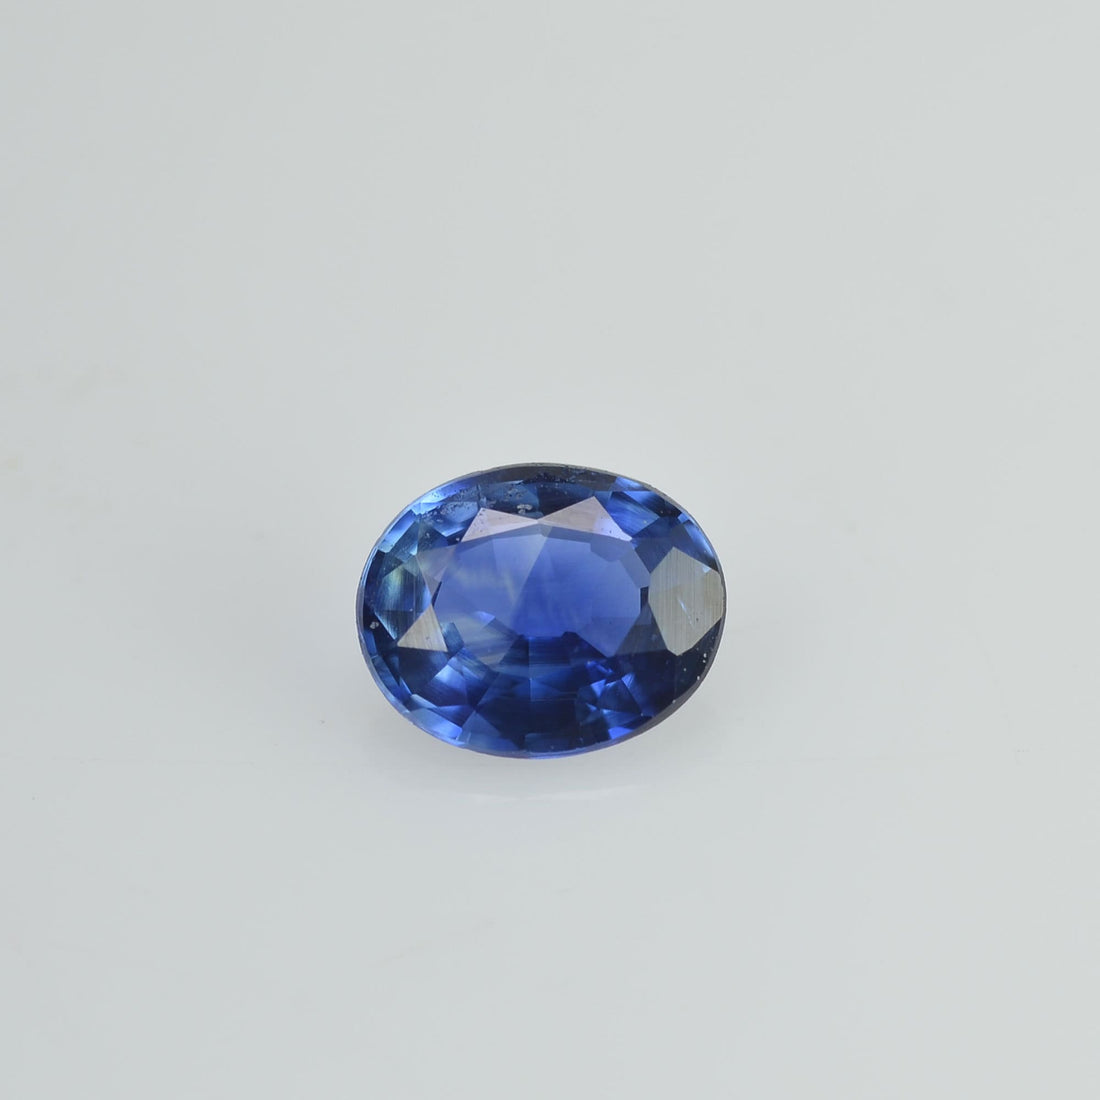 0.35 cts Natural Blue Sapphire Loose Gemstone Oval Cut